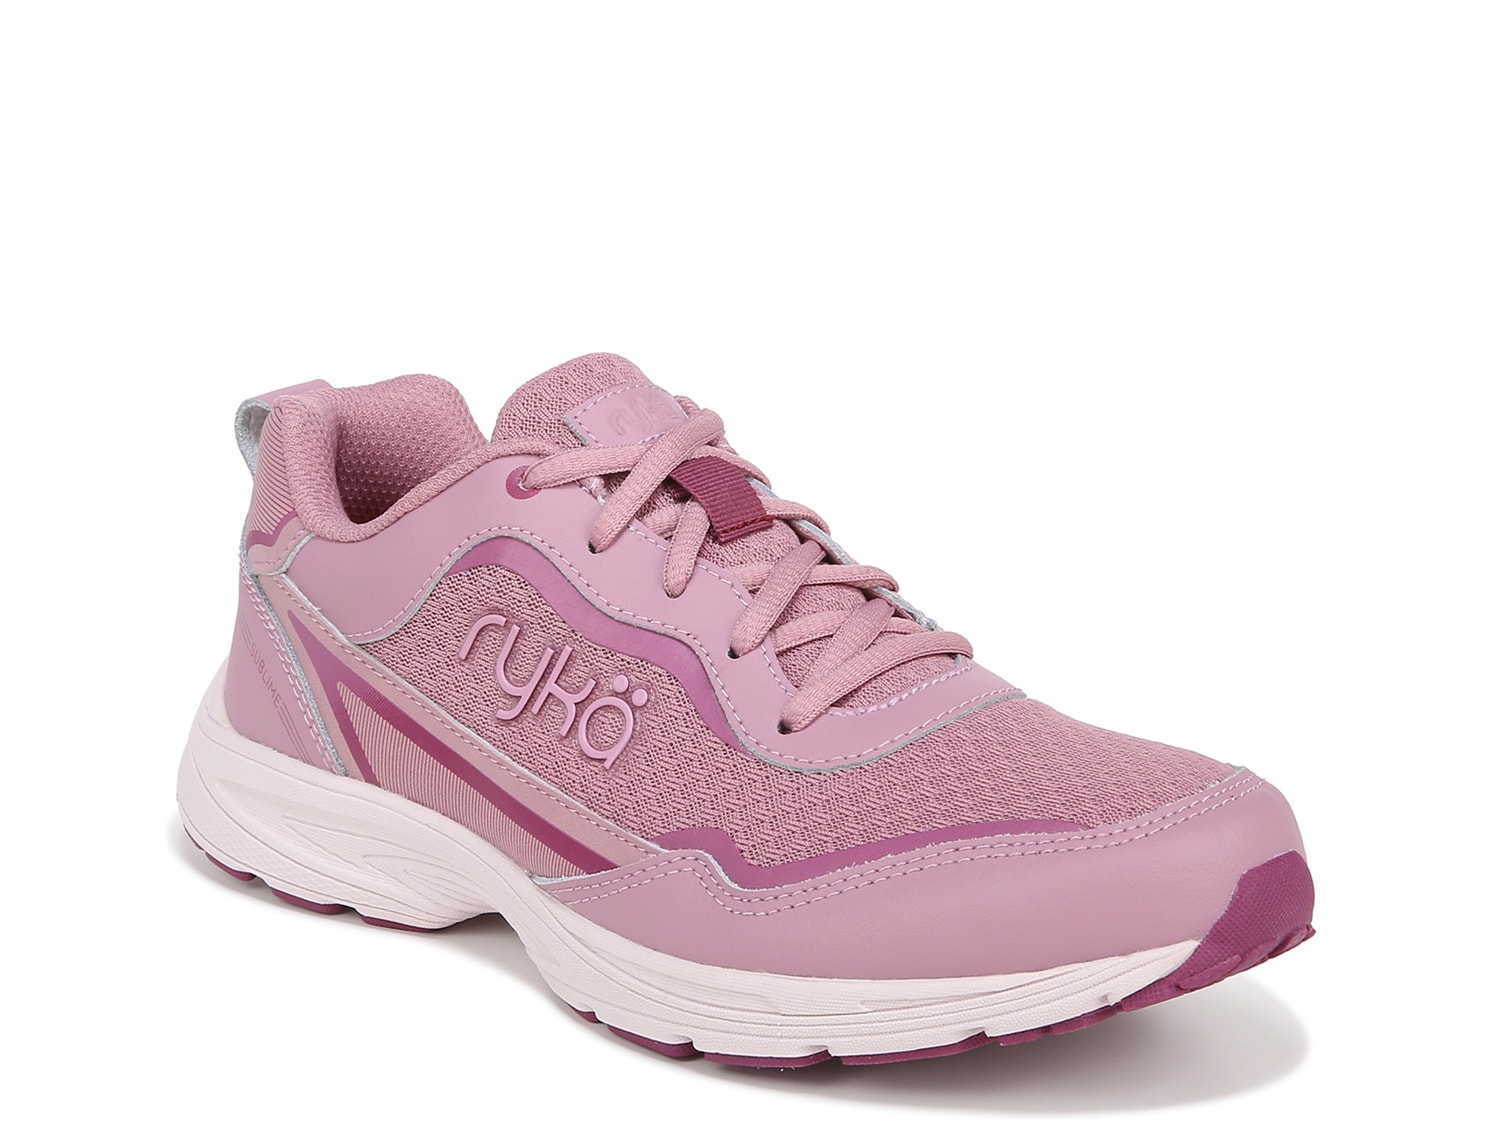 Ryka - Women's Athletic Arch Support Shoes - Free Shipping at